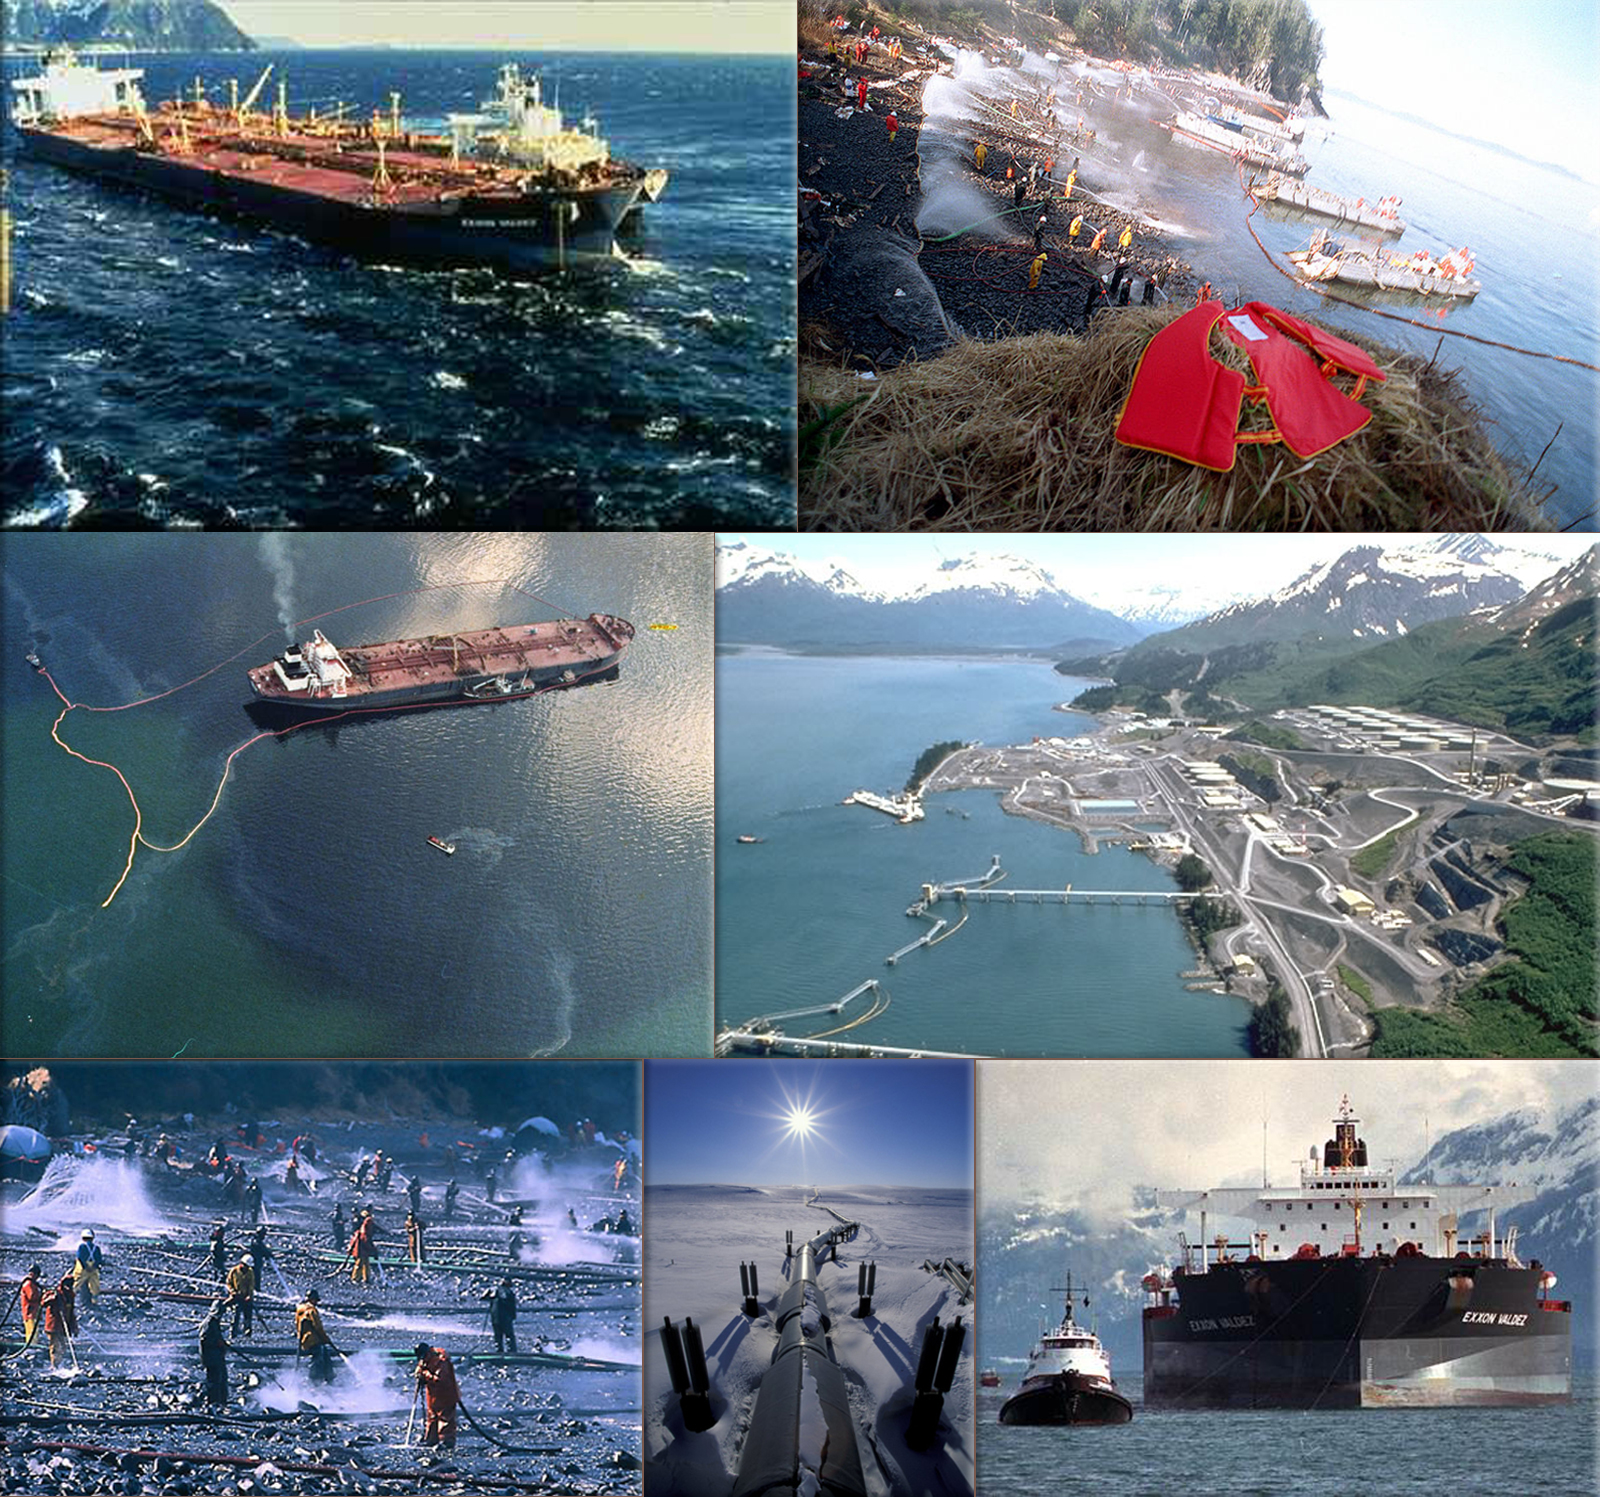 Exxon Valdez oil spill occurred in Prince William Sound, Alaska, on March 24, 1989, when Exxon Valdez, an oil tanker bound for Long Beach, California struck Prince William Sound's Bligh Reef and spilled 260,000 to 750,000 barrels (41,000 to 119,000 m3) of crude oil (It is considered to be one of the most devastating human-caused environmental disasters)